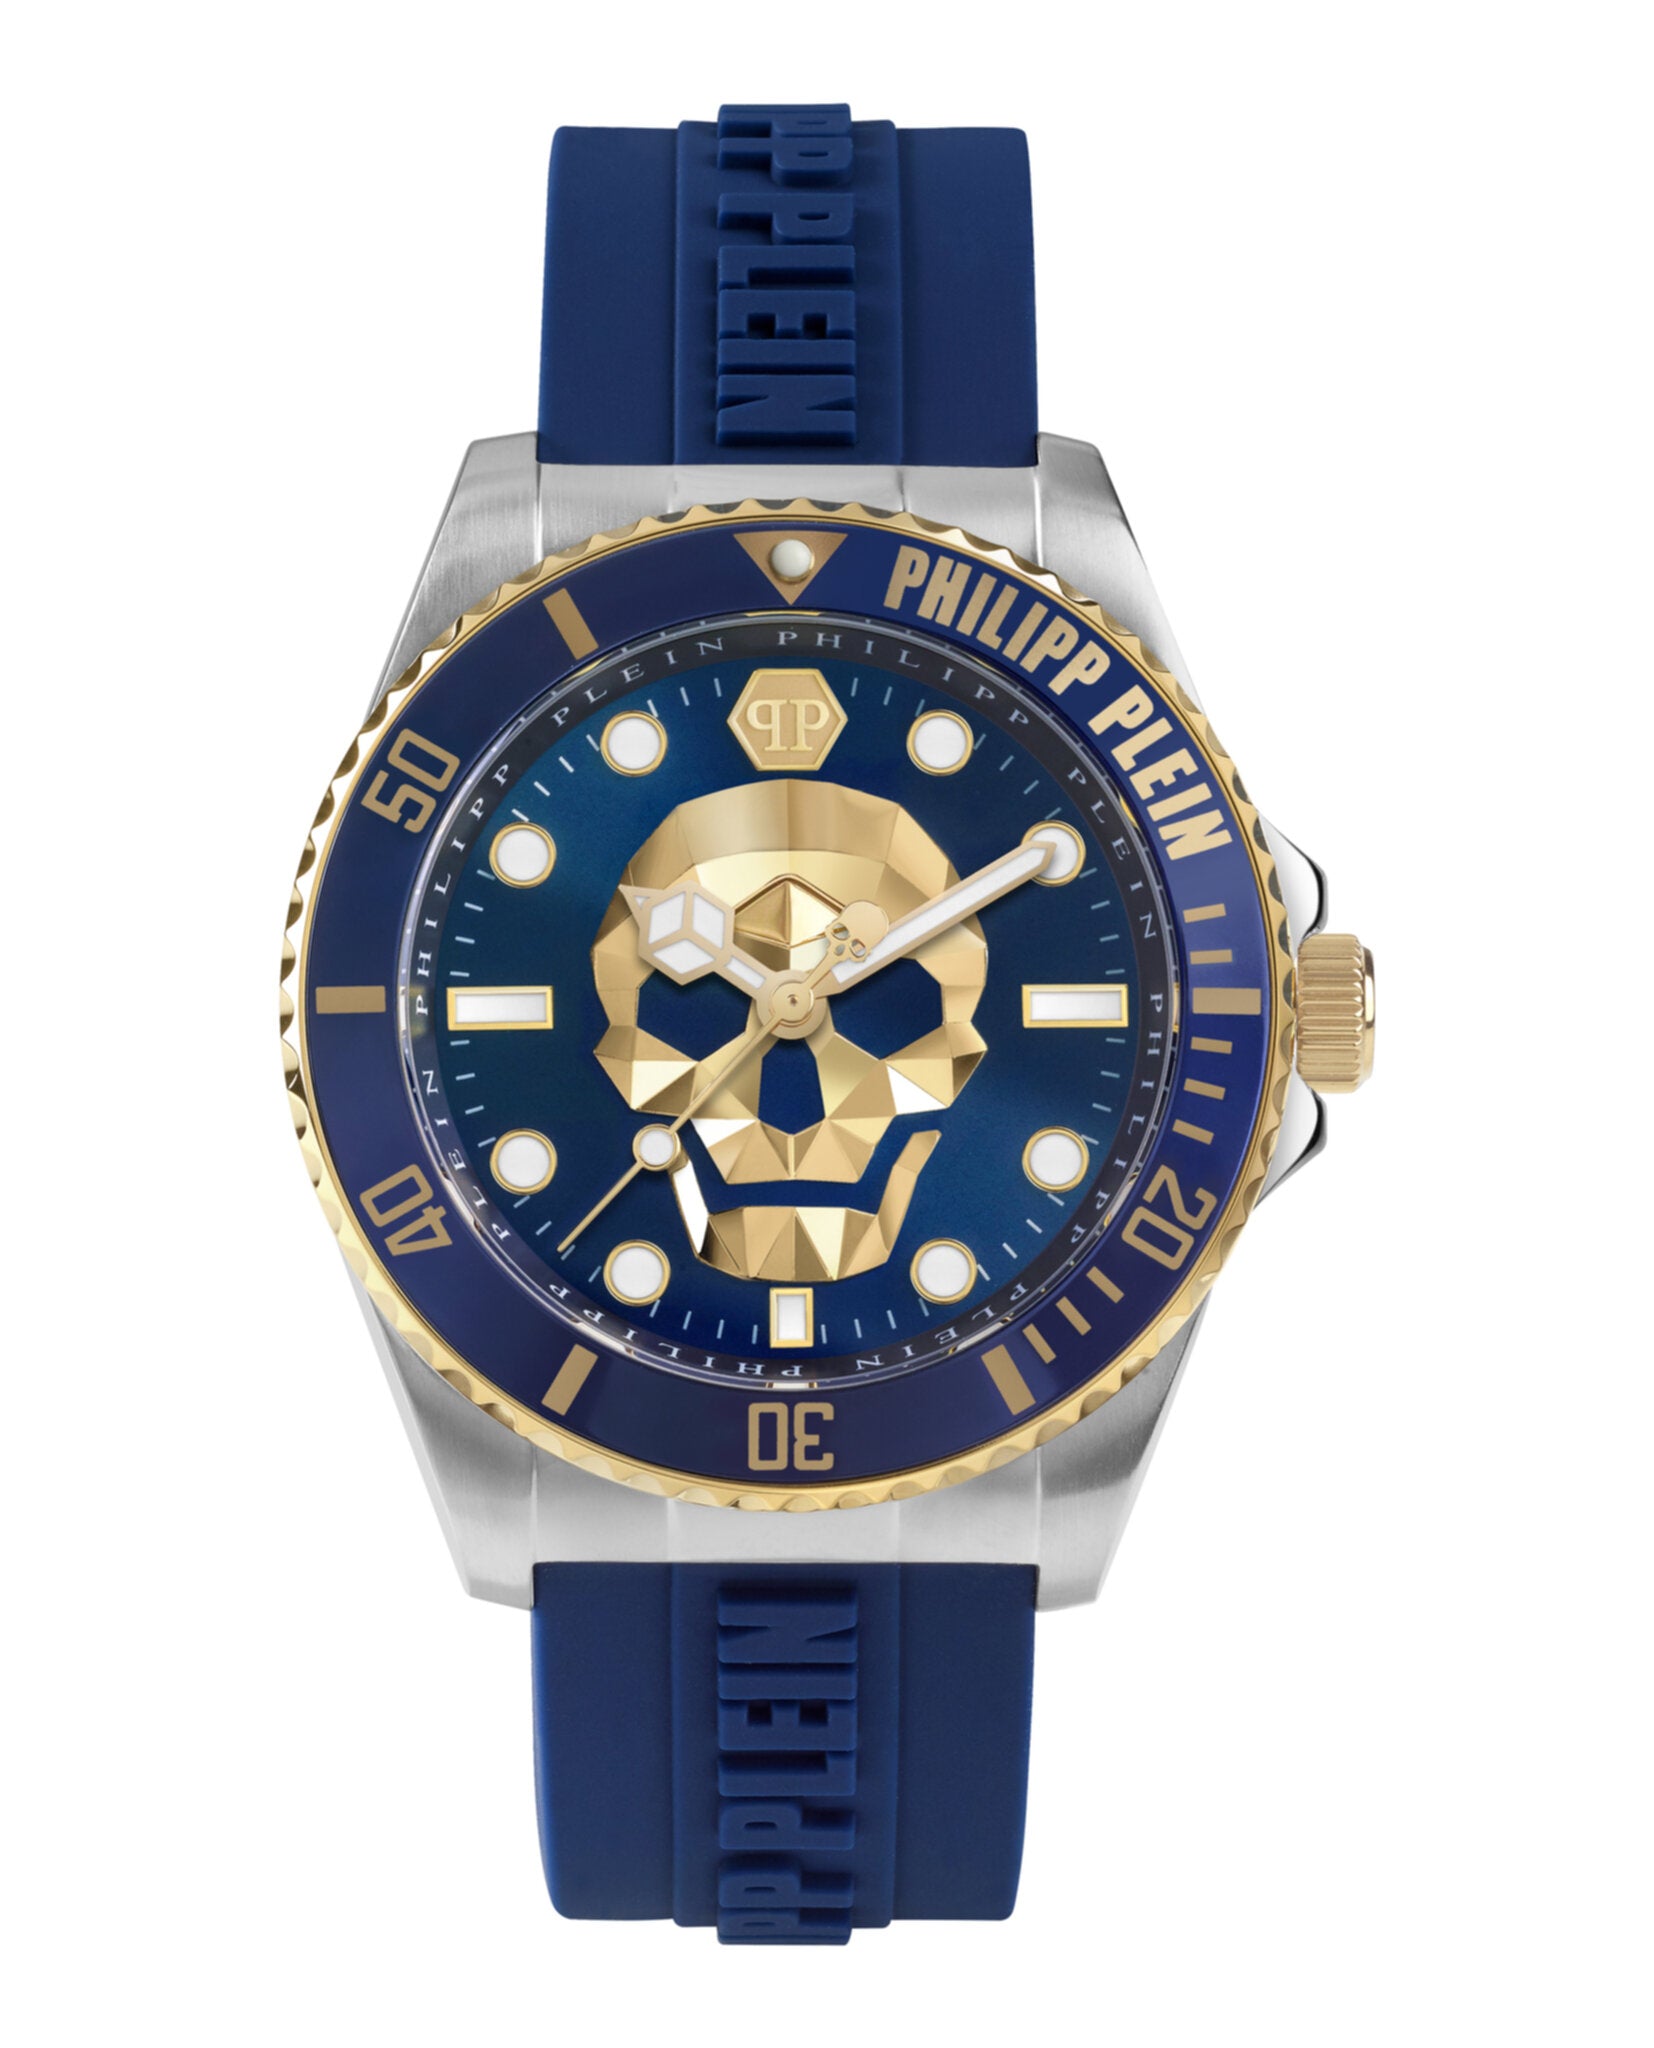 The $kull Diver Silicone Watch